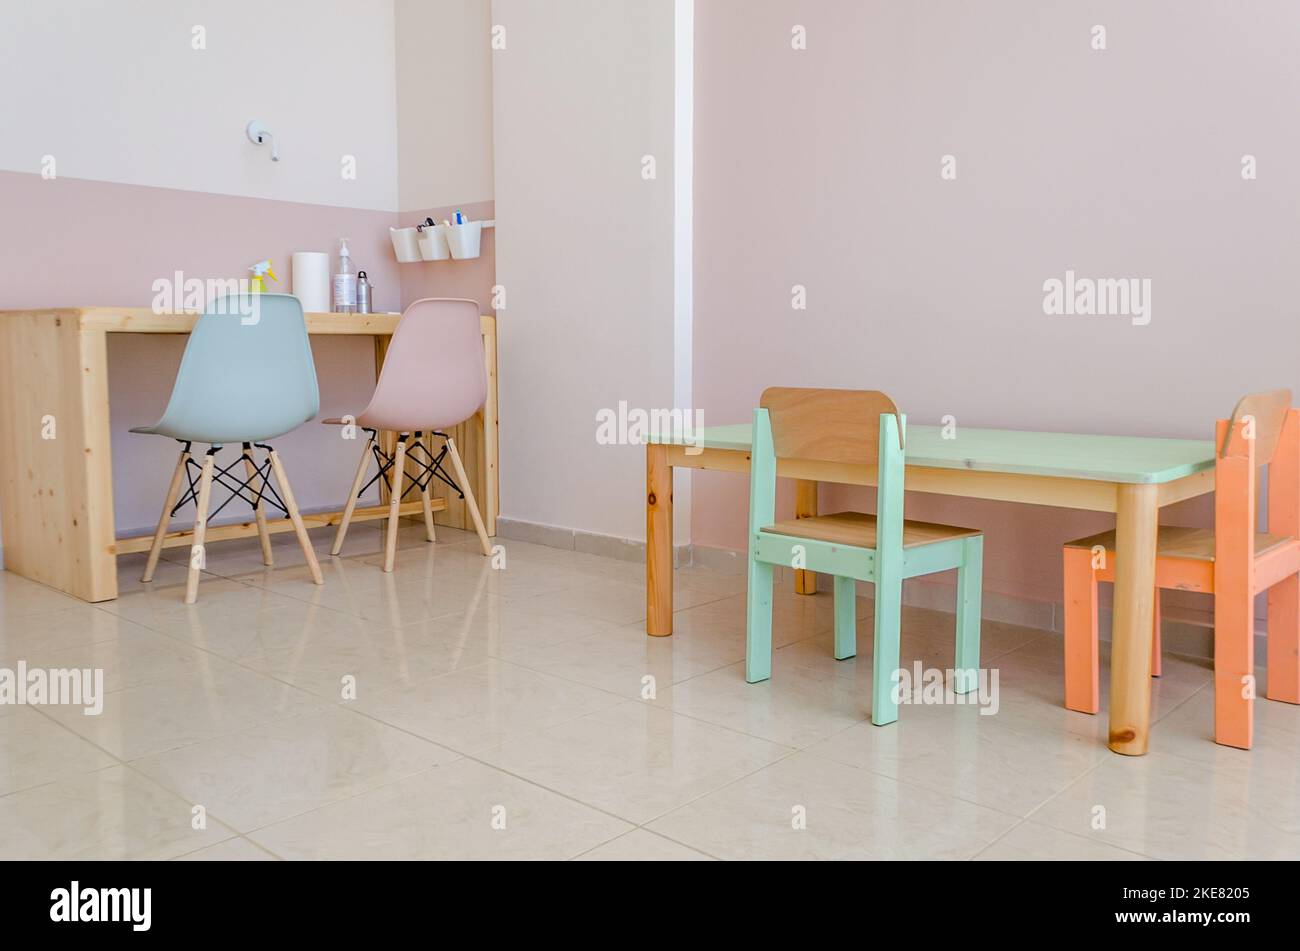 Modern Occupational Therapy Classroom. Nice Colored Wooden Furniture Sets with Tables and Chairs. Interior Design and Stylish Decoration. Stock Photo